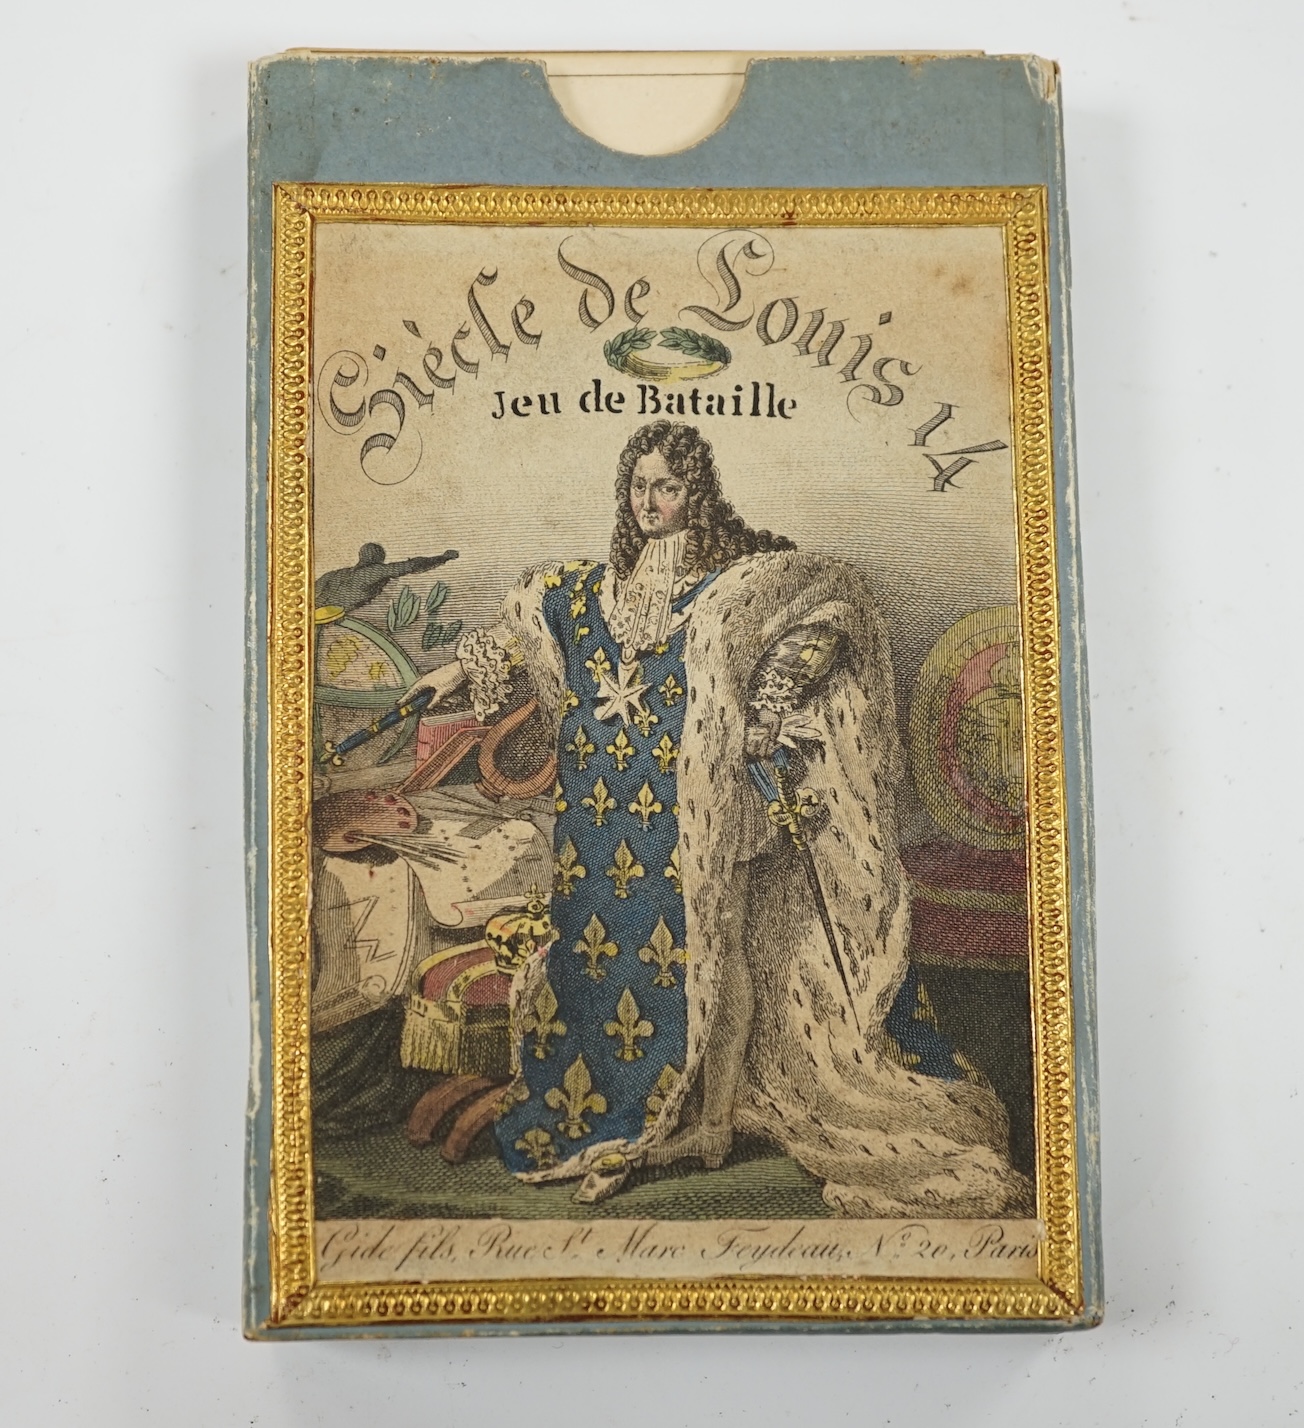 Jeu de Bataille, a set of French playing cards. Condition - poor to fair                                                                                                                                                    